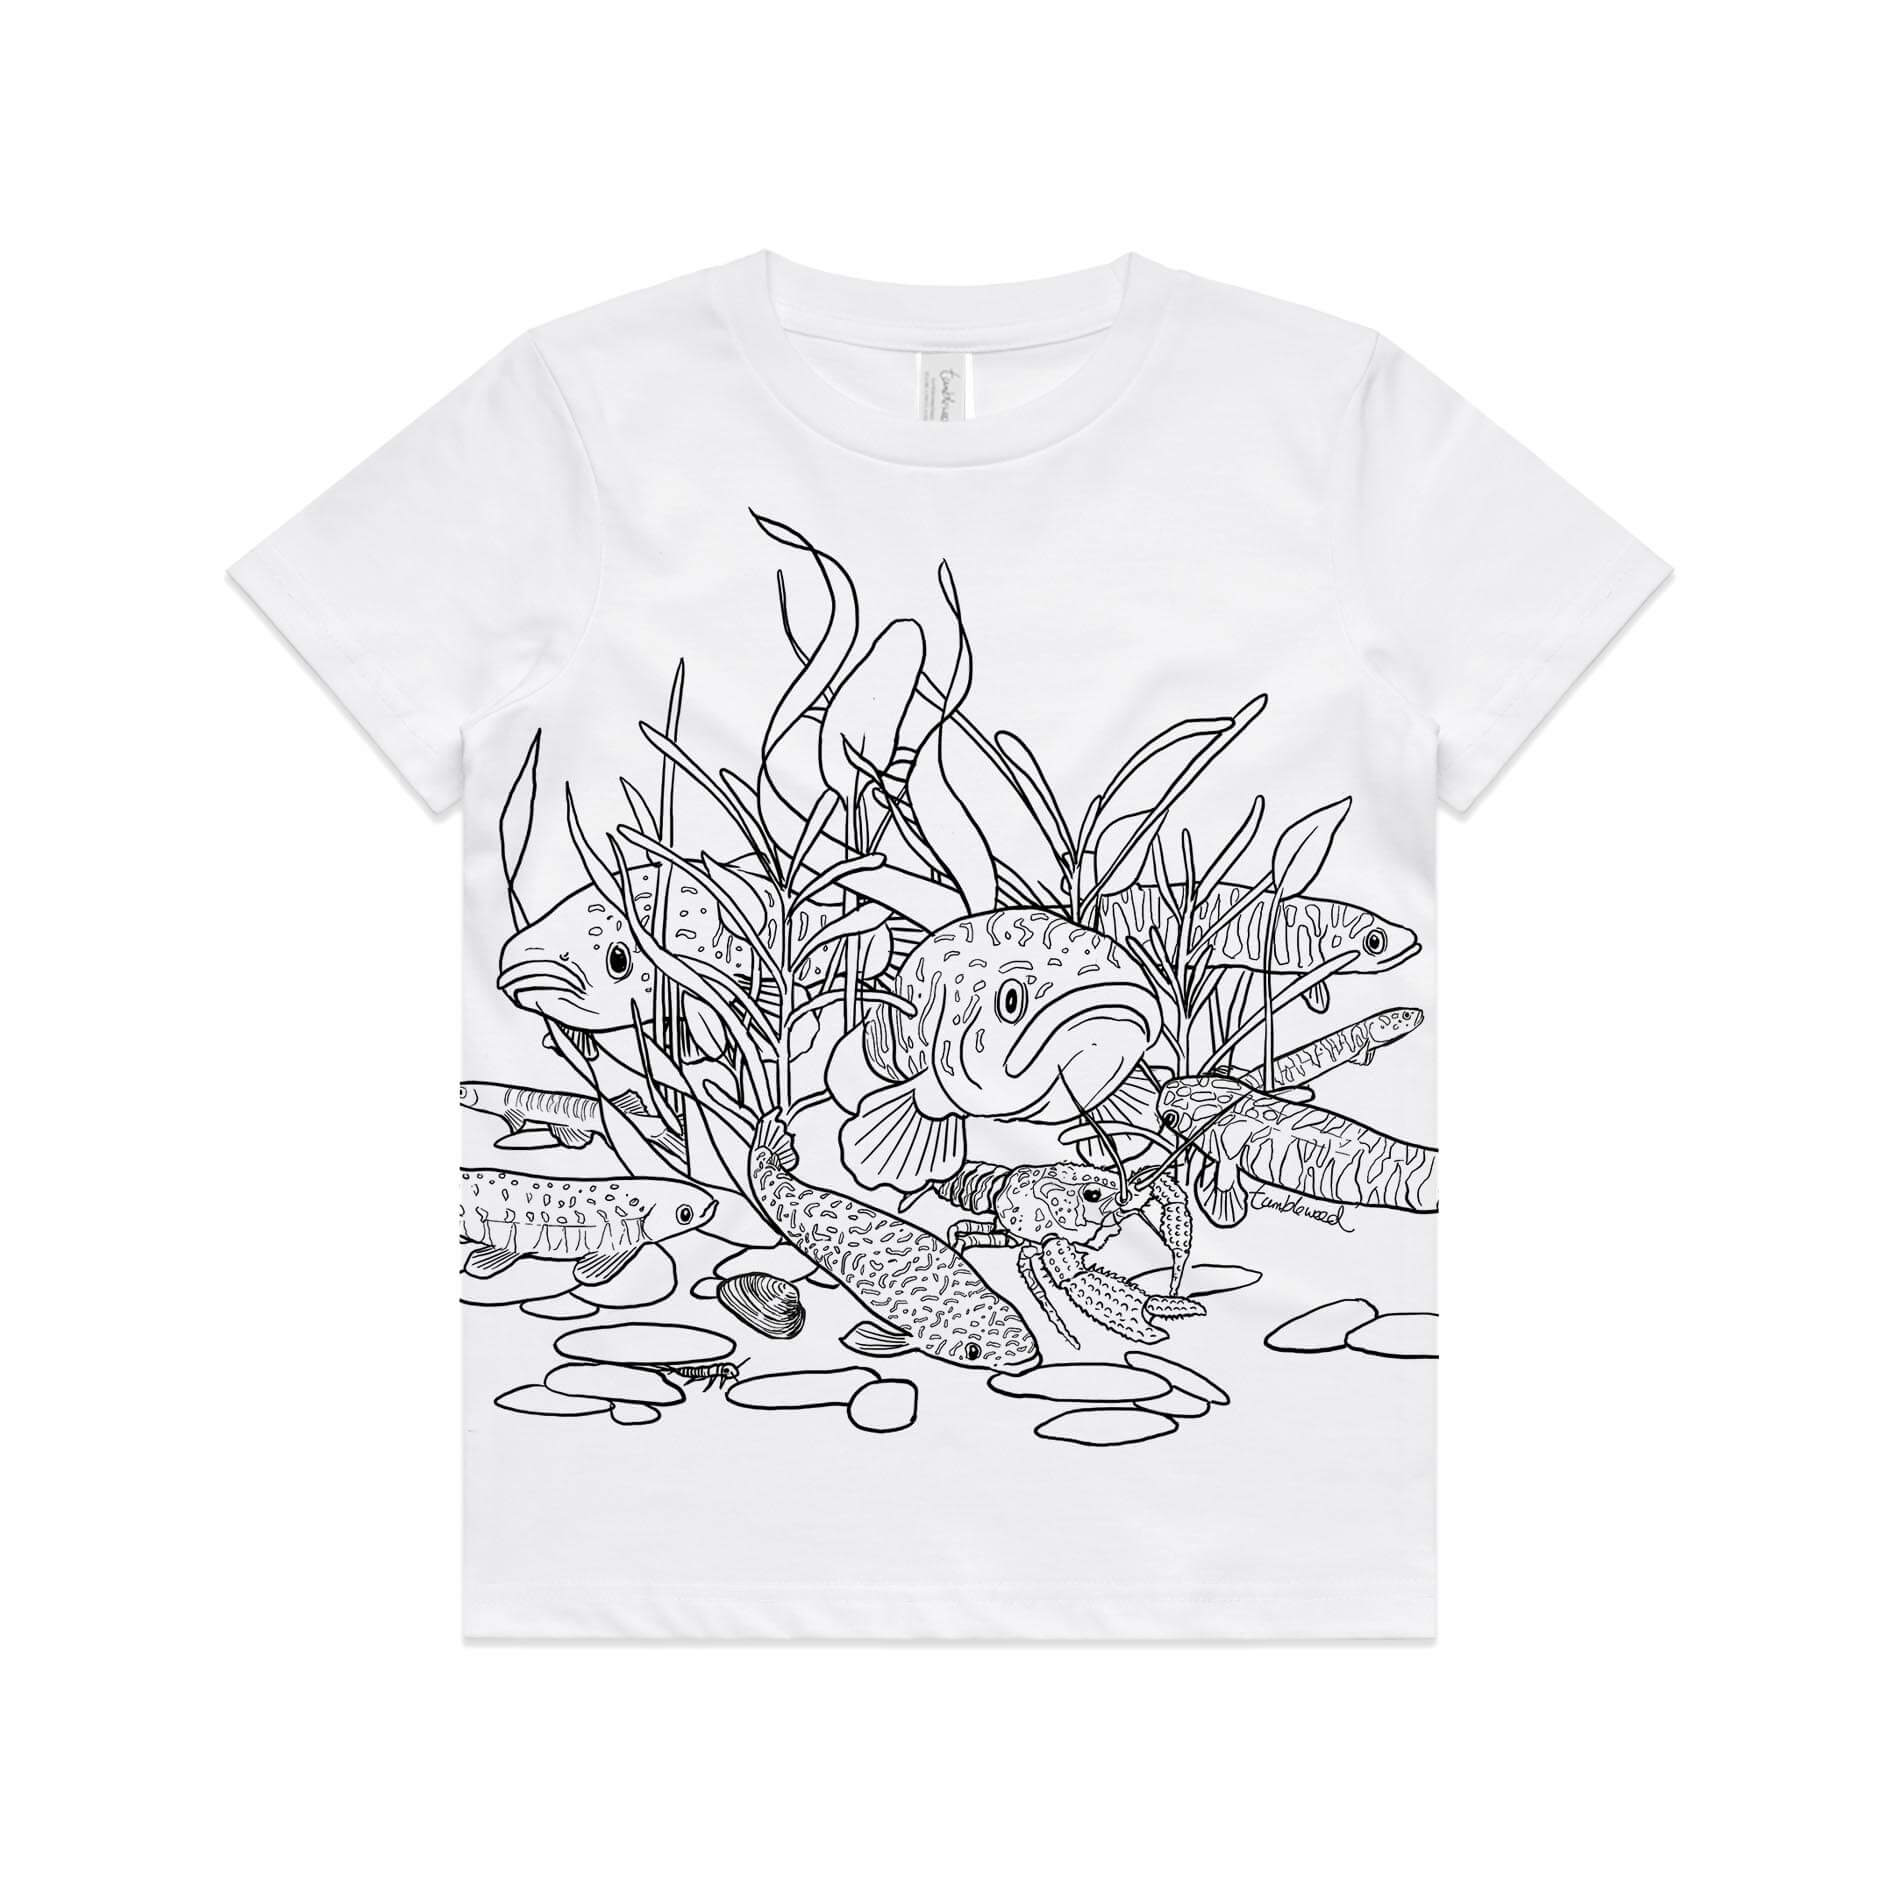 White, cotton kids' t-shirt with screen printed freshwater fish design.